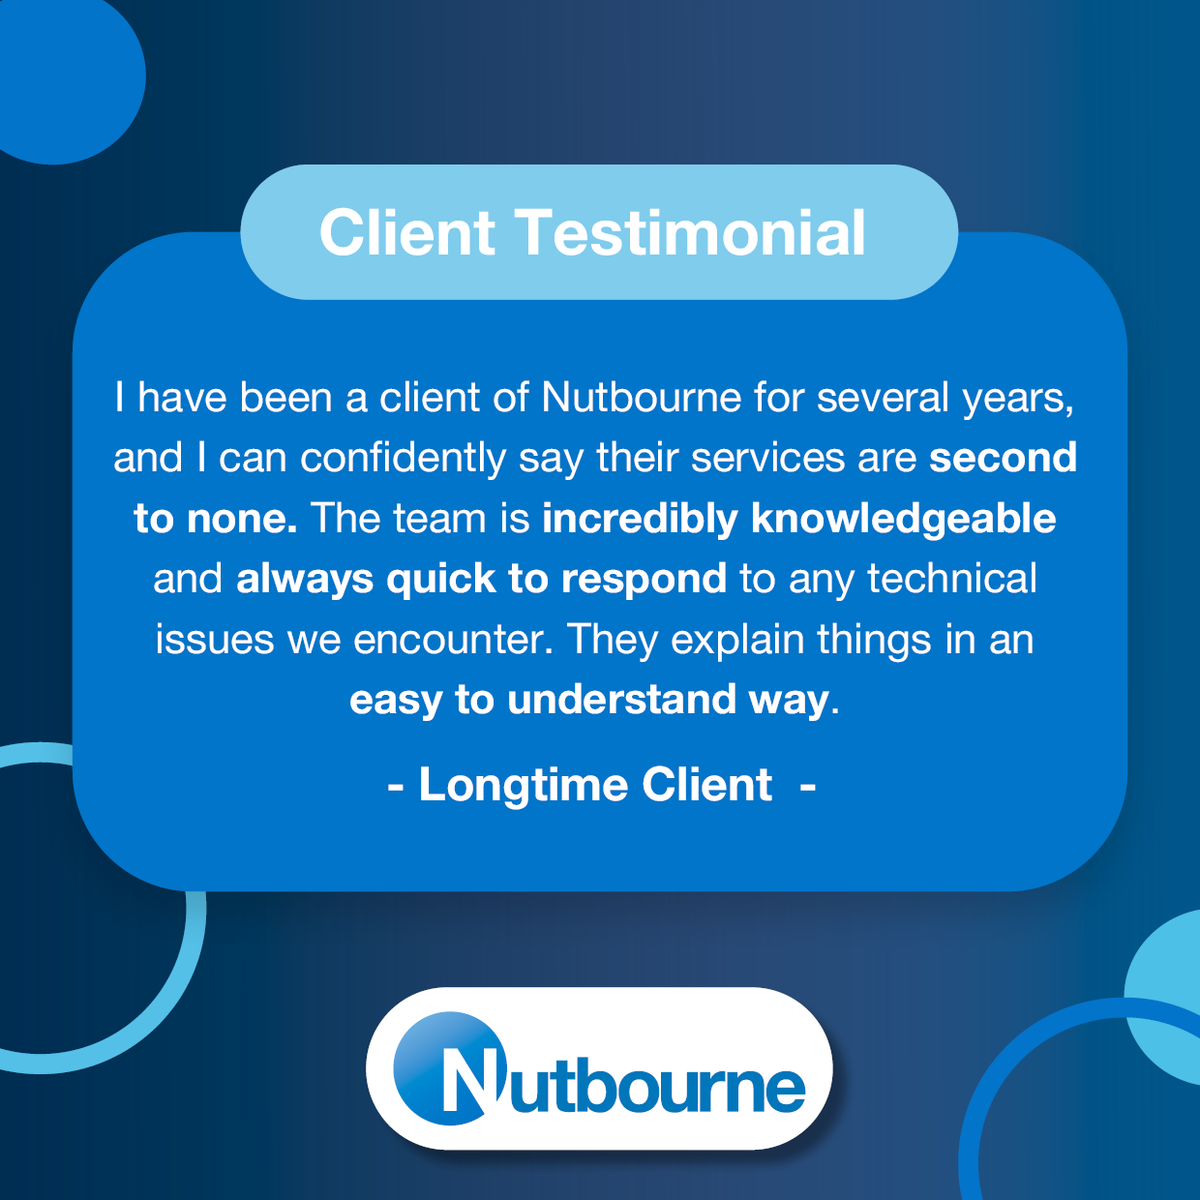 #CustomerReview #Feedback We always appreciate the kind feedback! If you have worked with us or are one of our current clients, please feel free to send your feedback to your Account Manager. This helps us improve and grow!